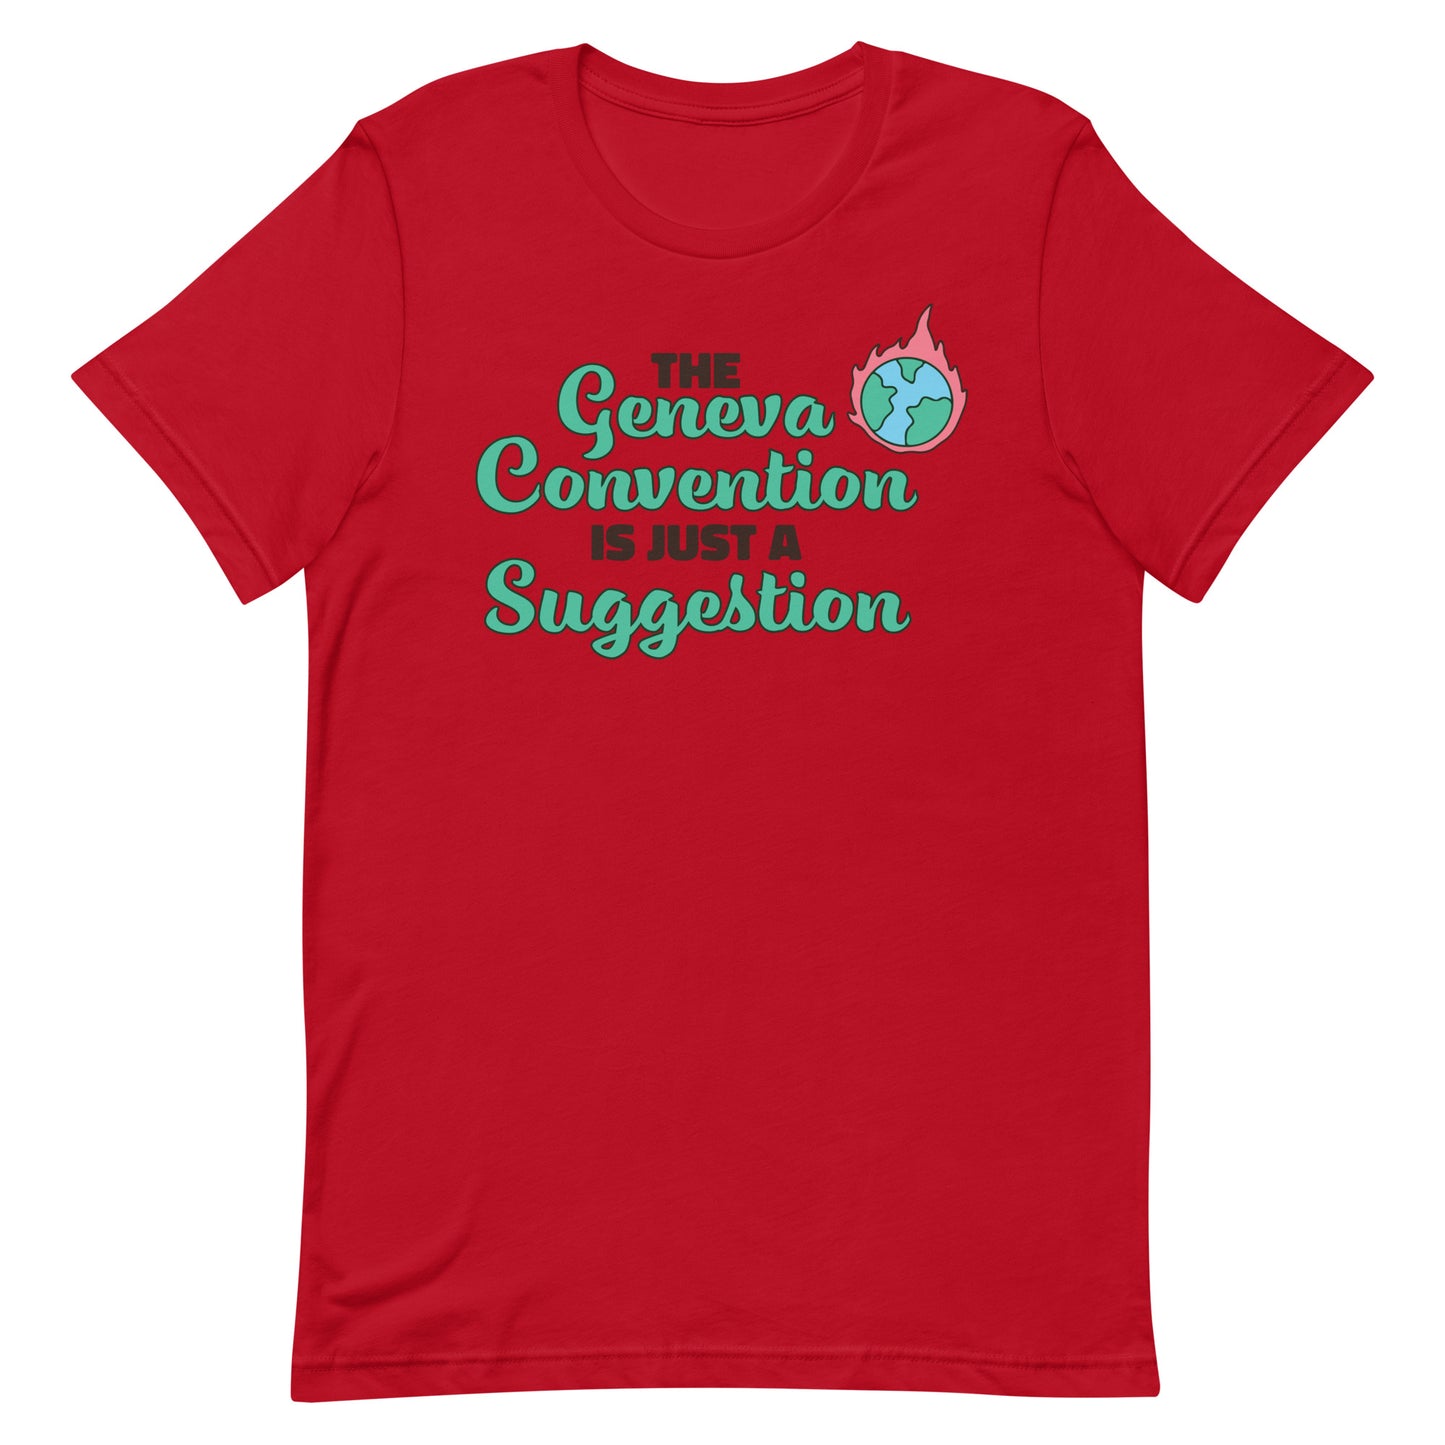 The Geneva Convention is Just a Suggestion Unisex t-shirt